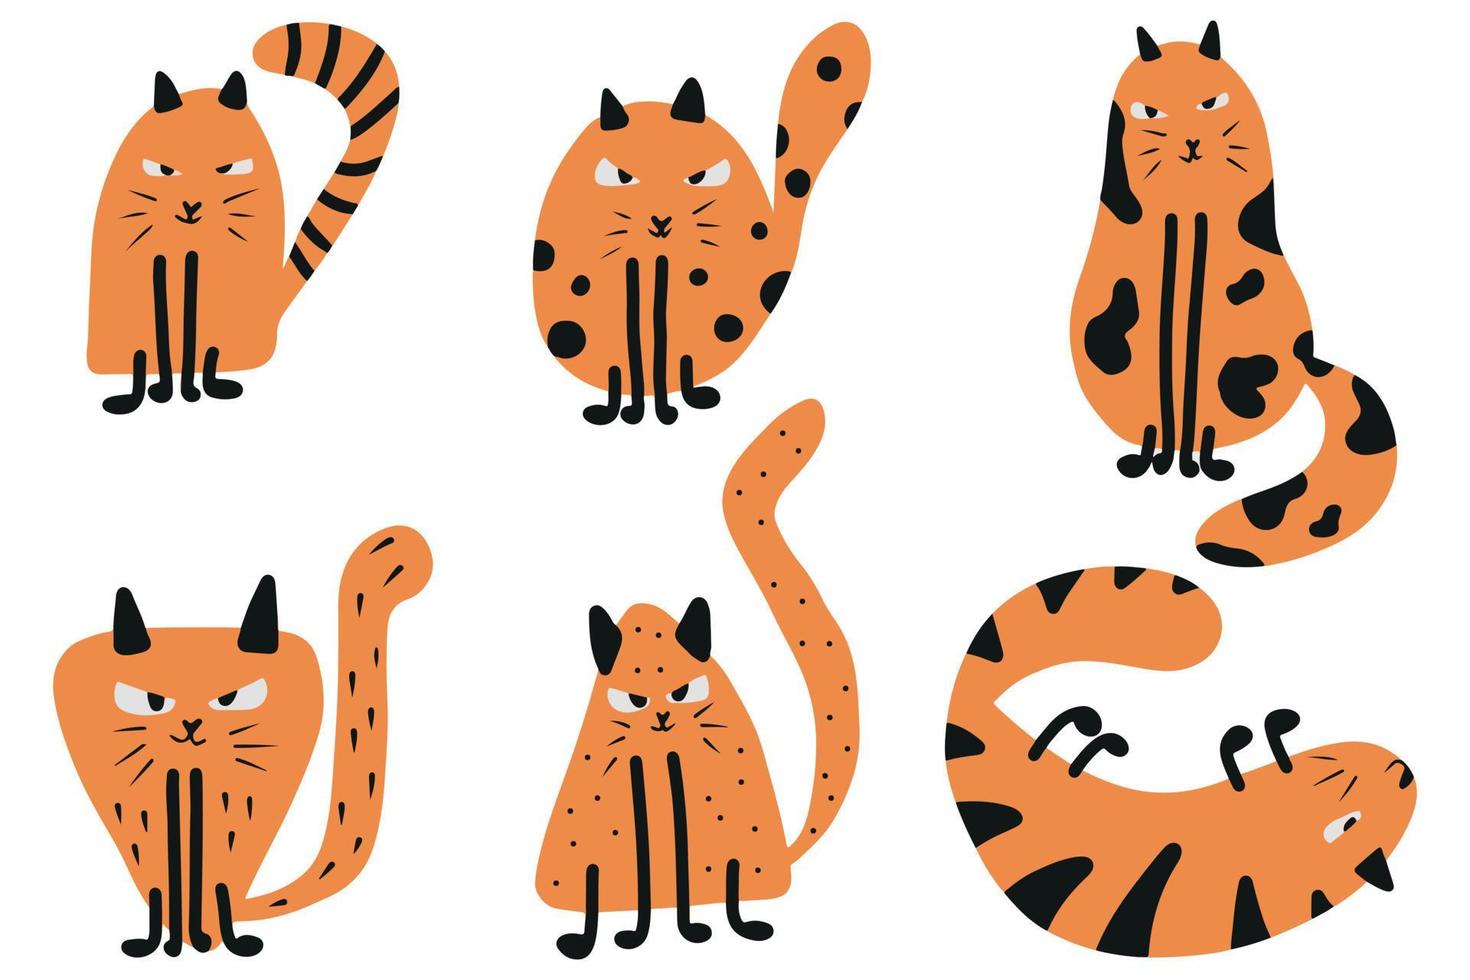 Children's hand-drawn set of ginger cats. Hand-drawn cat in cartoon style. vector